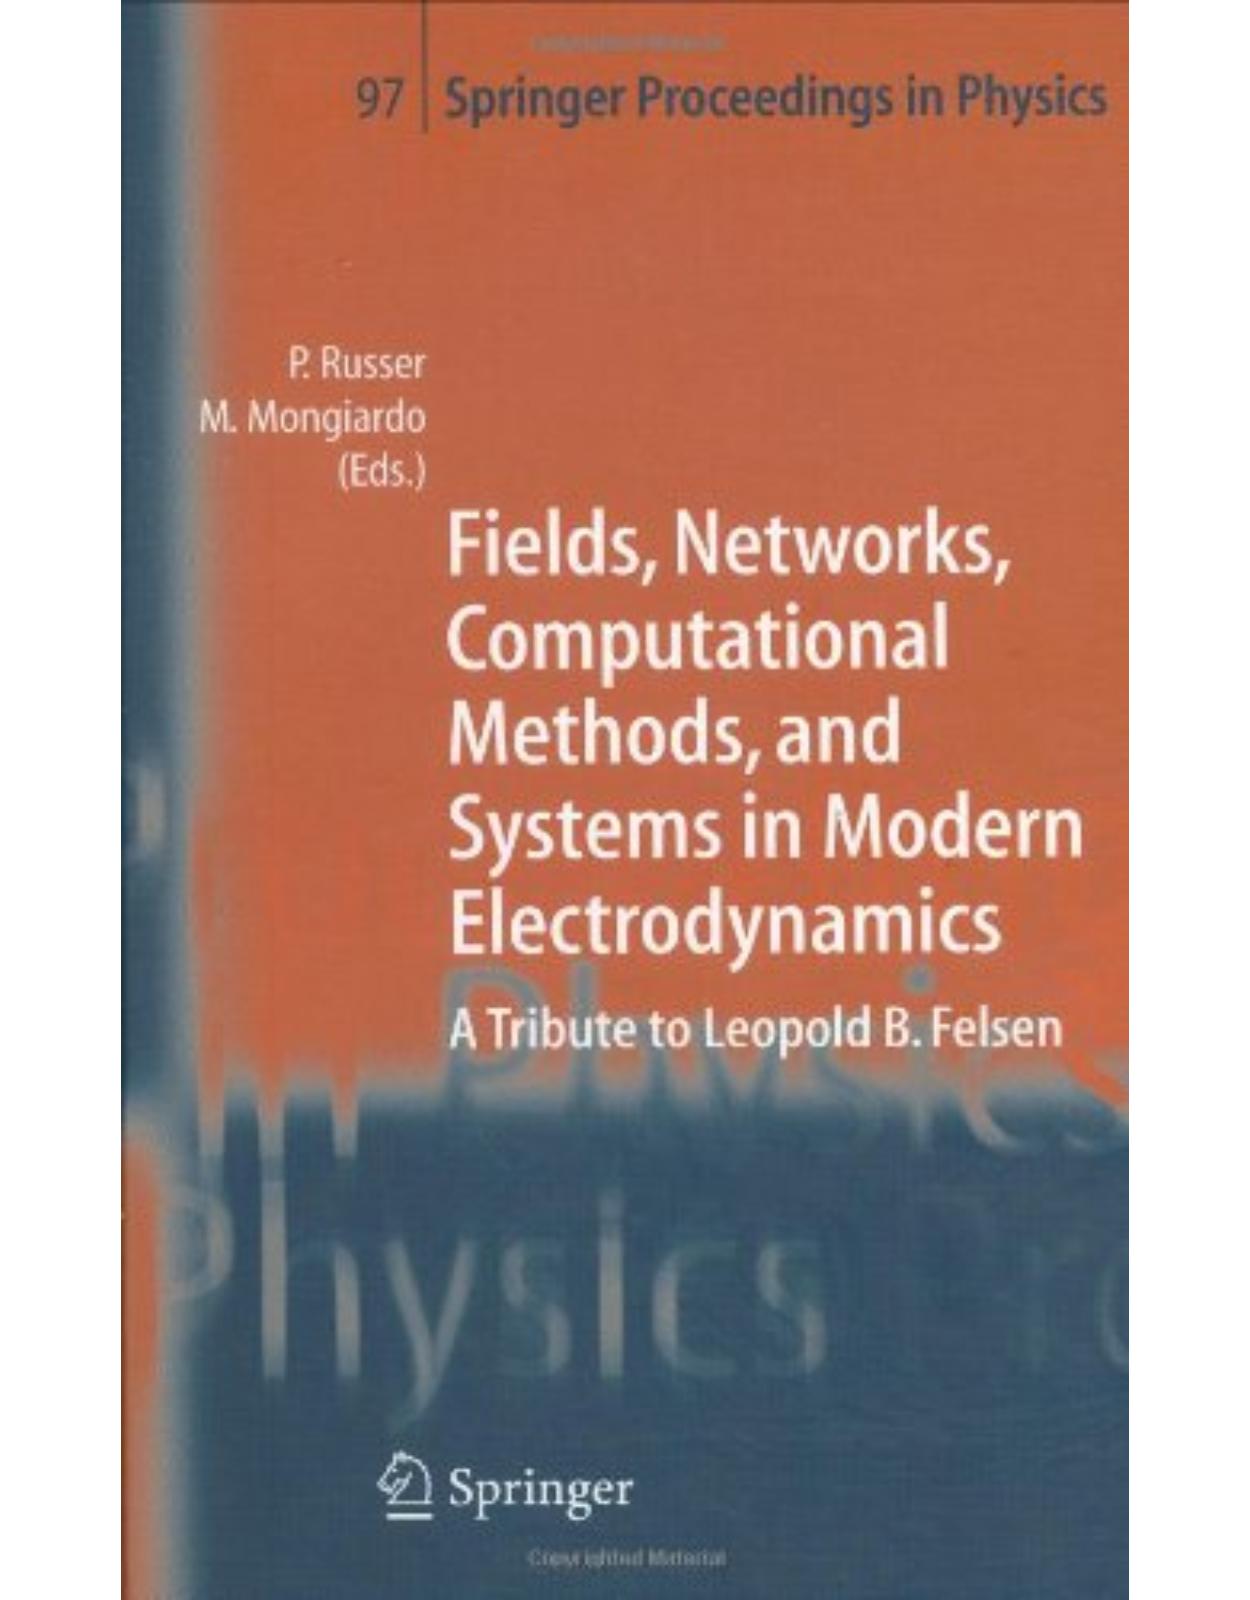 Fields, Networks, Computational Methods, and Systems in Modern Electrodynamics: A Tribute to Leopold B. Felsen (Springer Proceedings in Physics) 